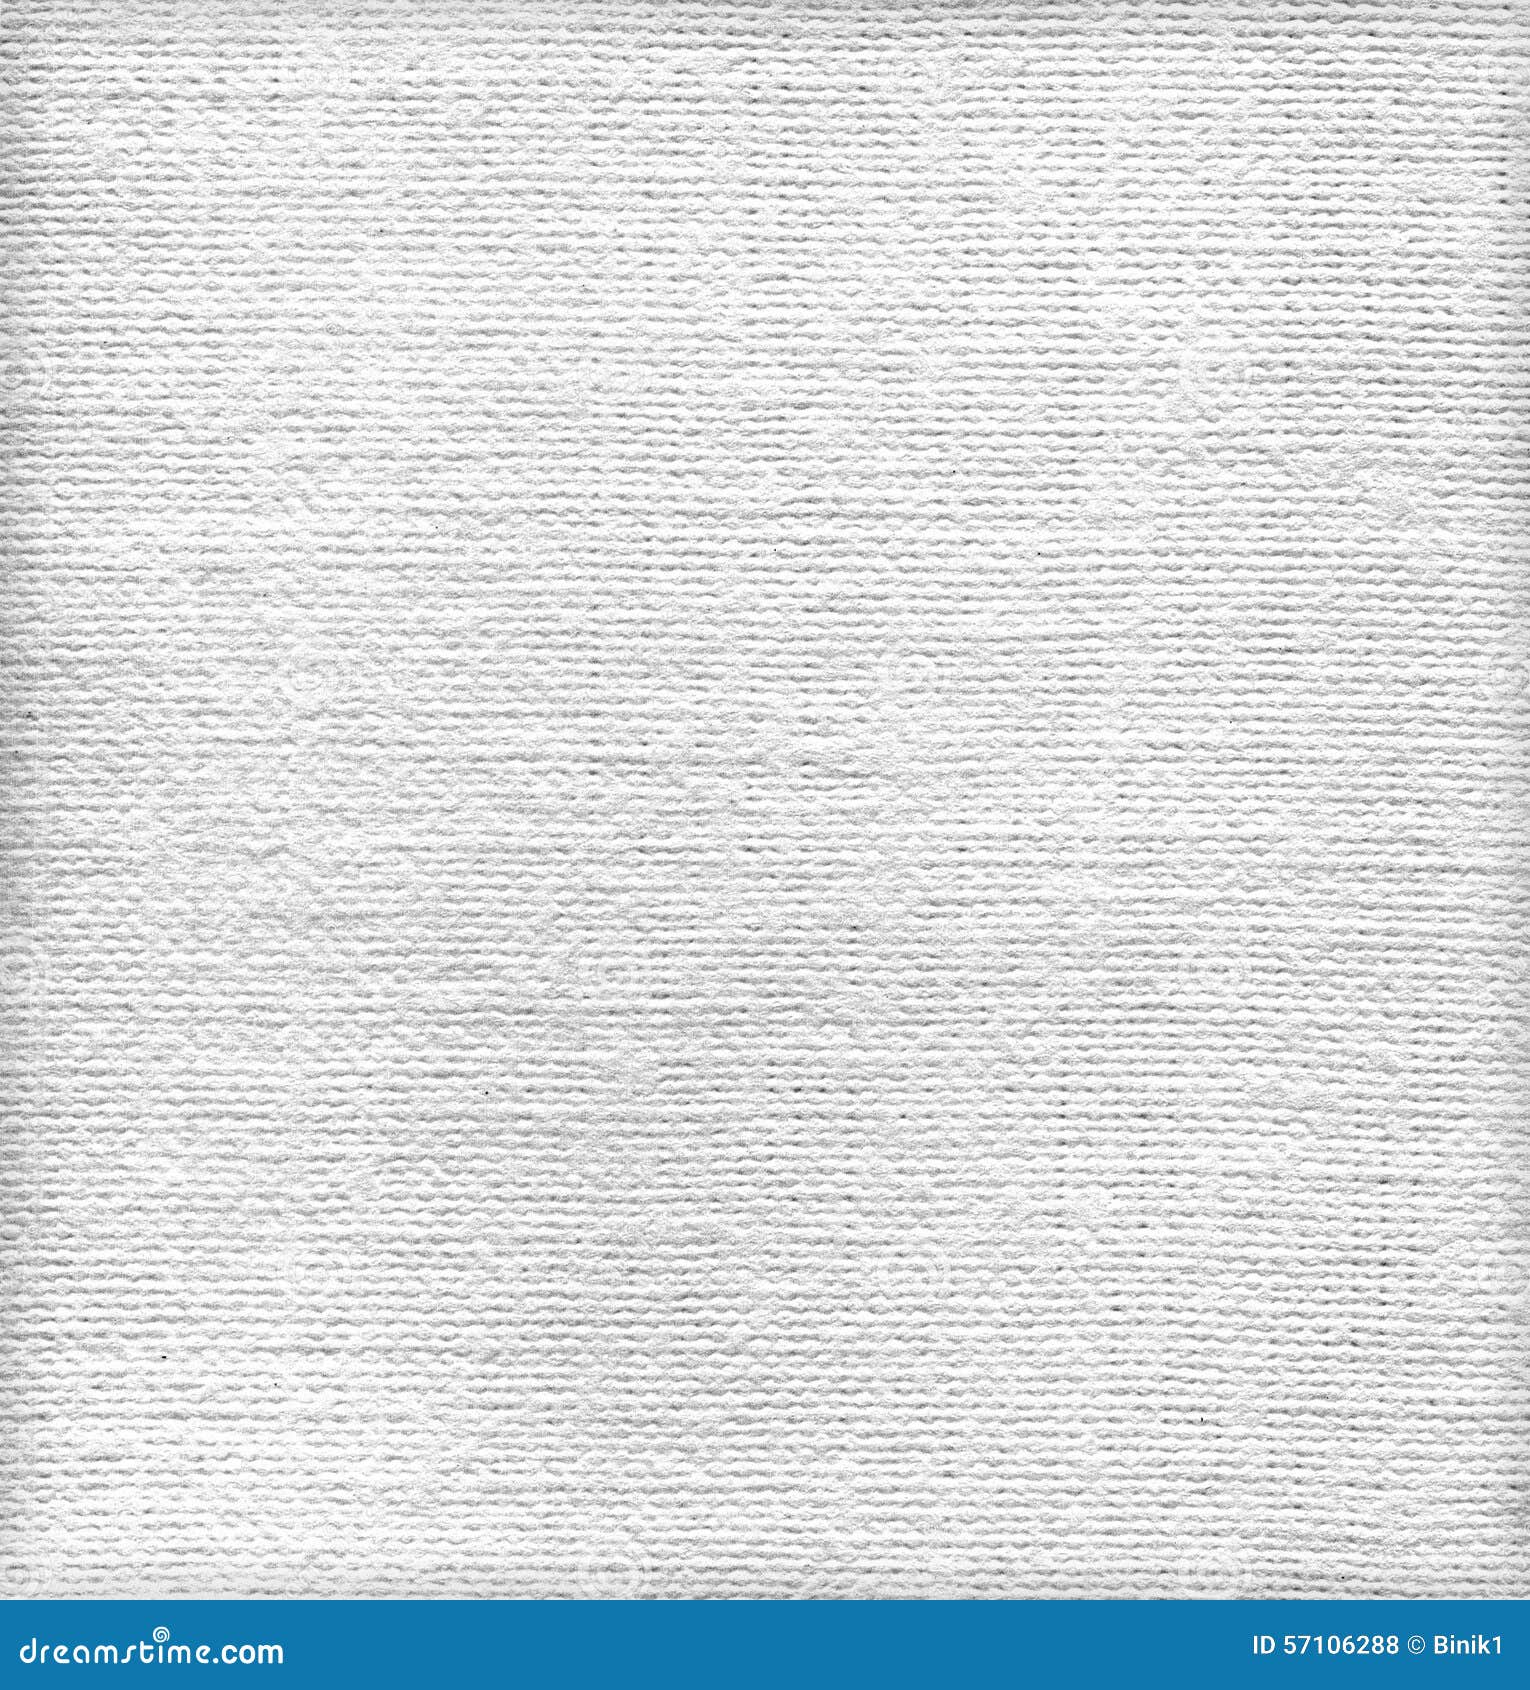 Blank white paper sheet stock photo. Image of book, parchment - 57106288